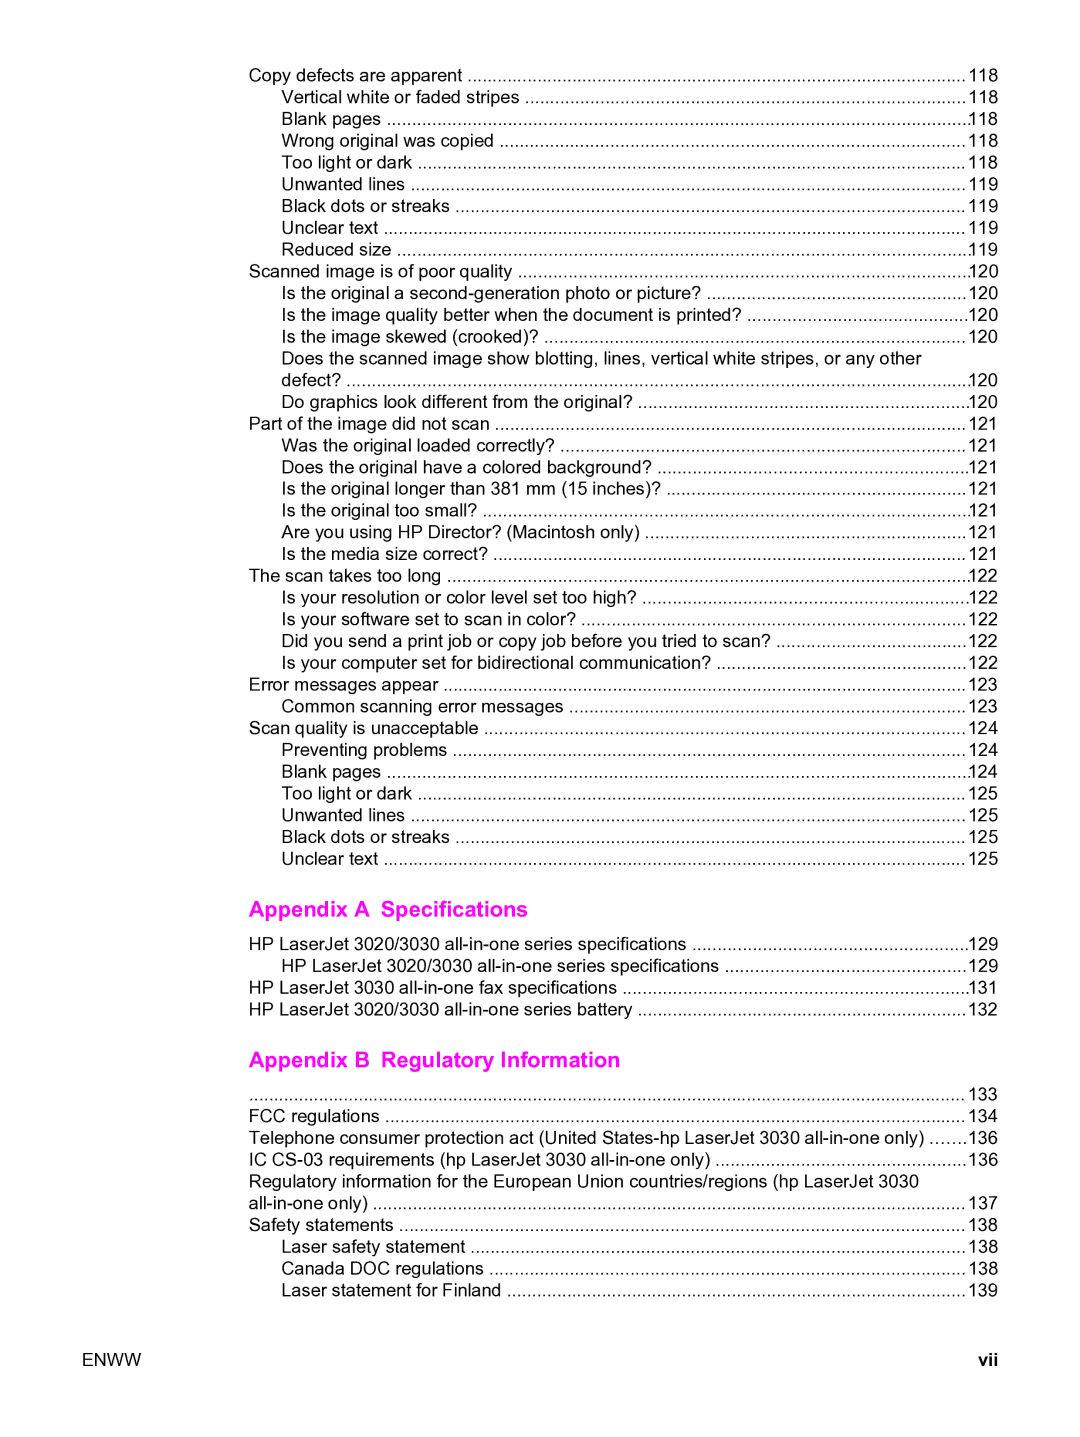 HP 3020 manual Appendix a Specifications, Vii 